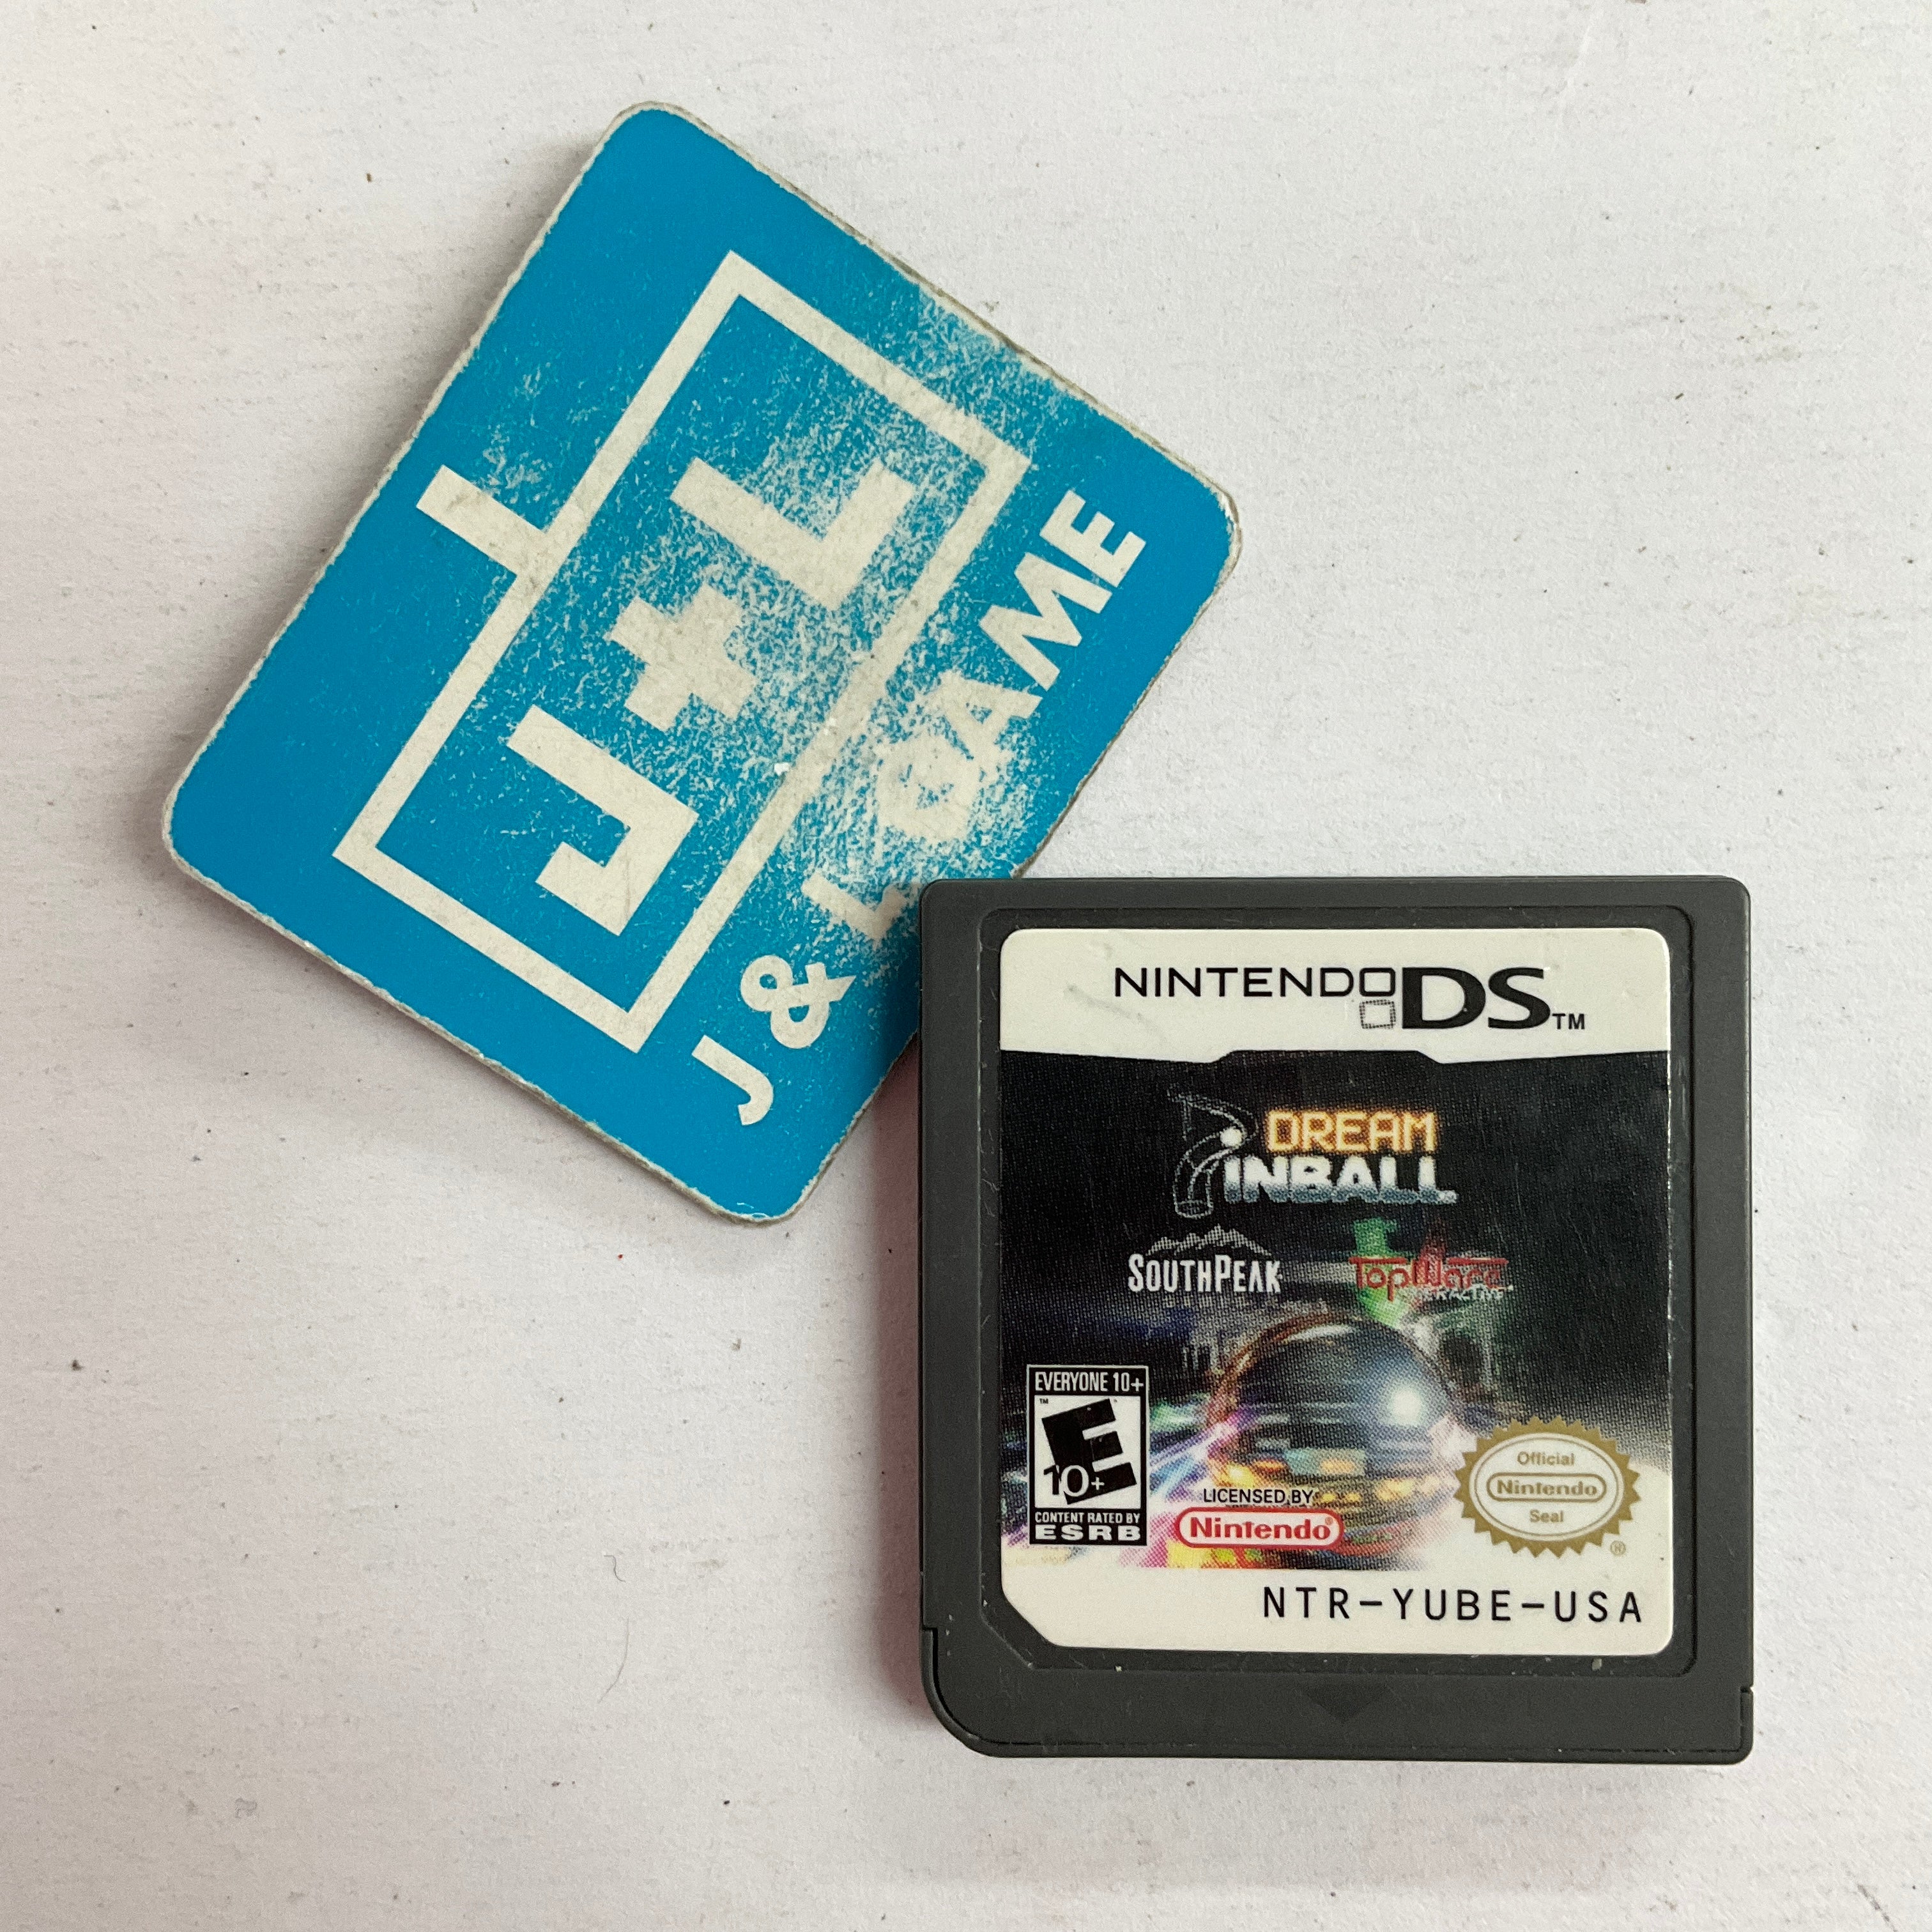 Dream Pinball 3D - (NDS) Nintendo DS [Pre-Owned] Video Games Southpeak   